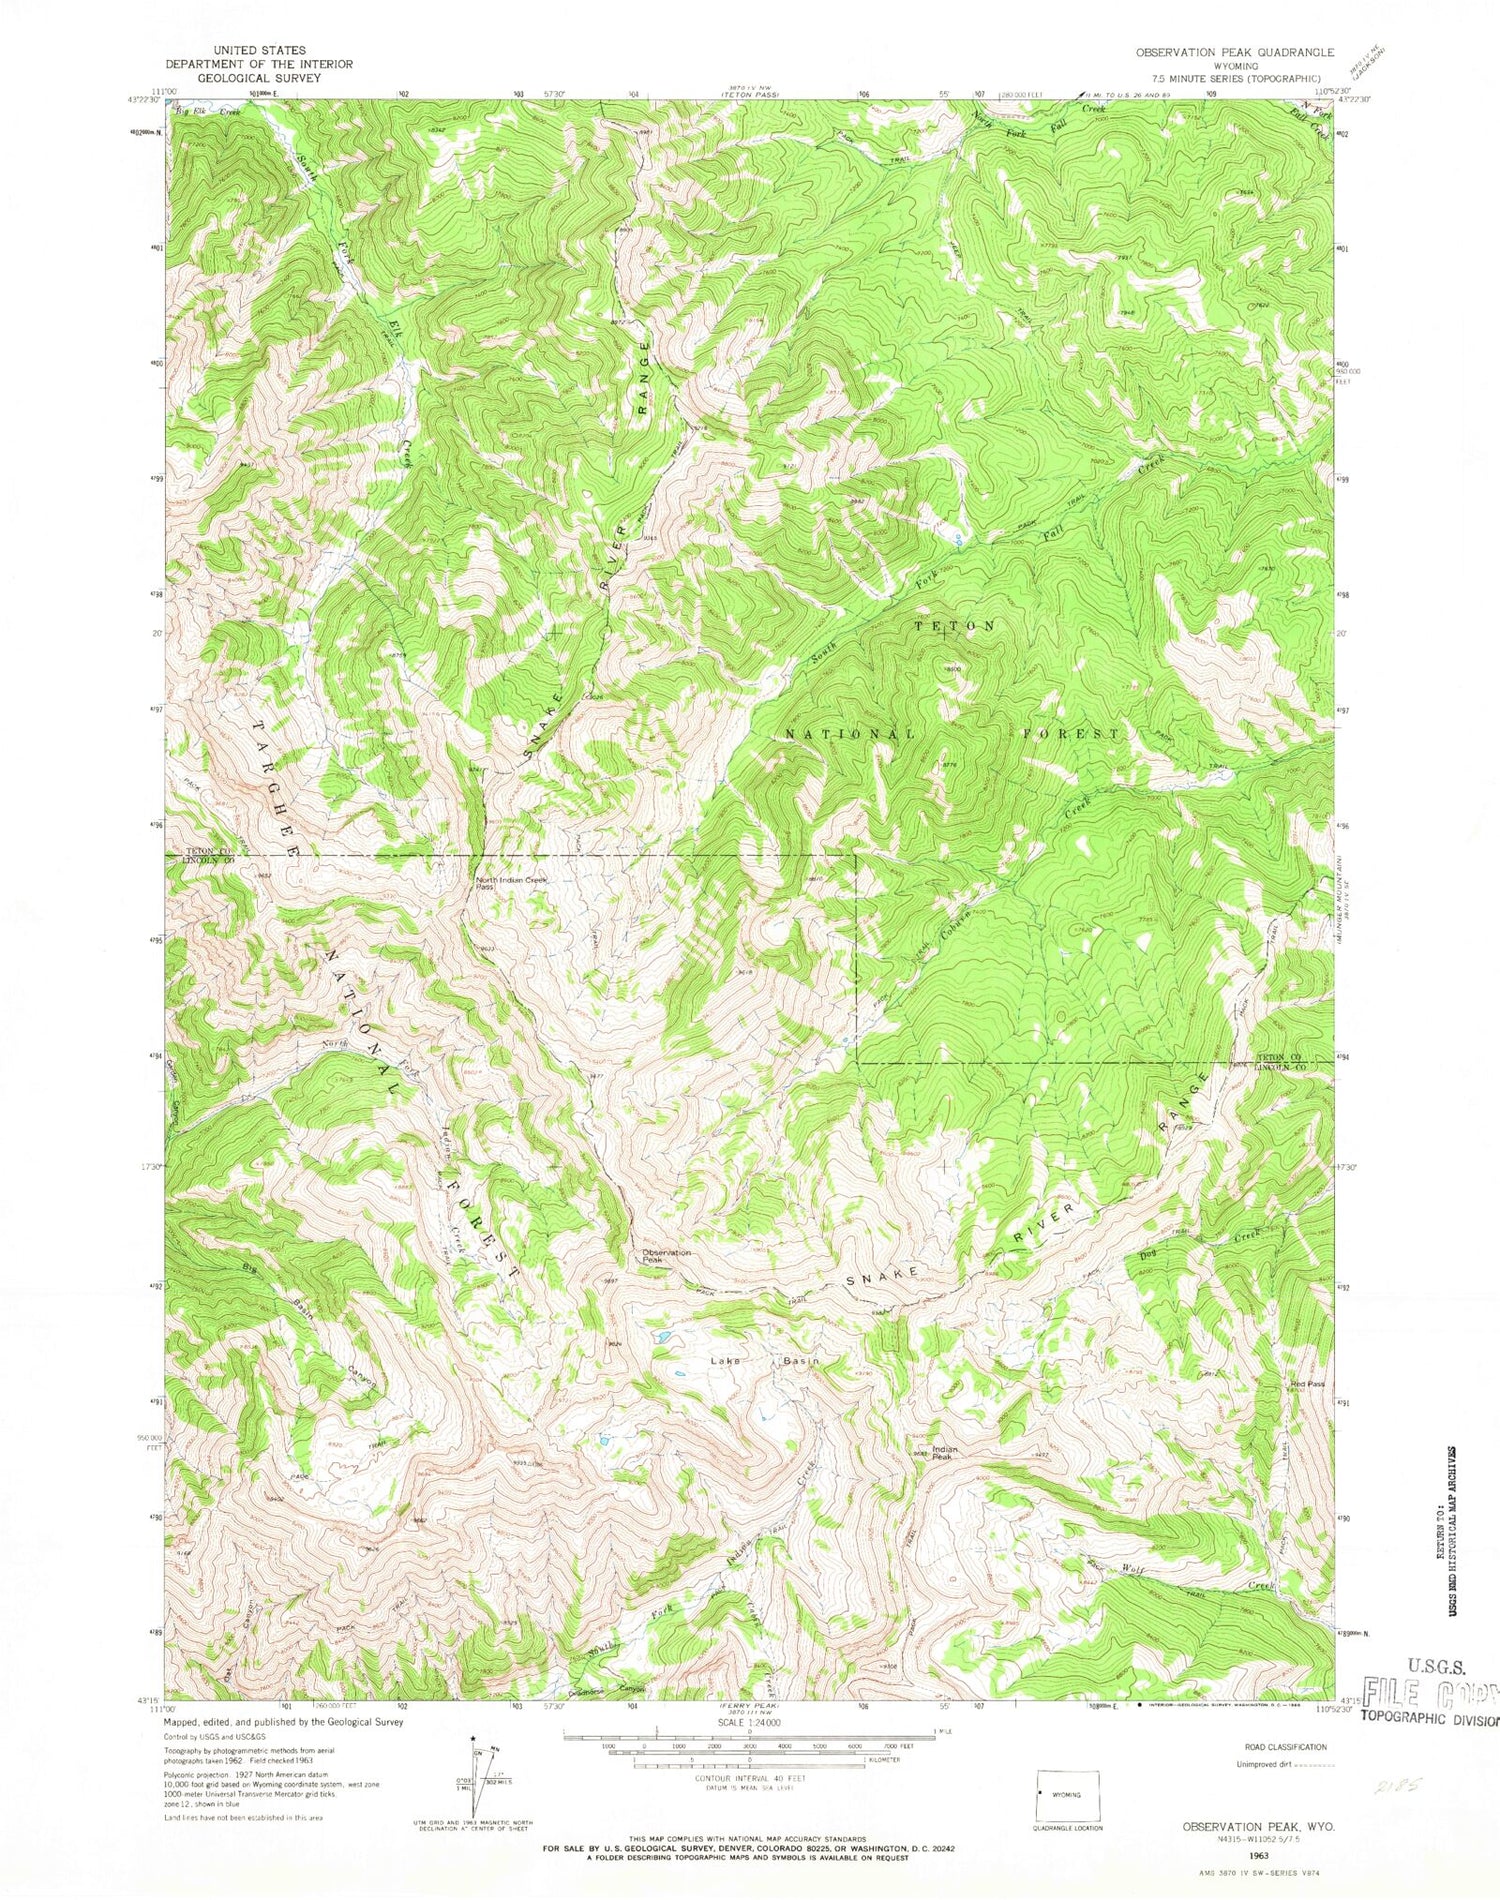 Classic USGS Observation Peak Wyoming 7.5'x7.5' Topo Map Image